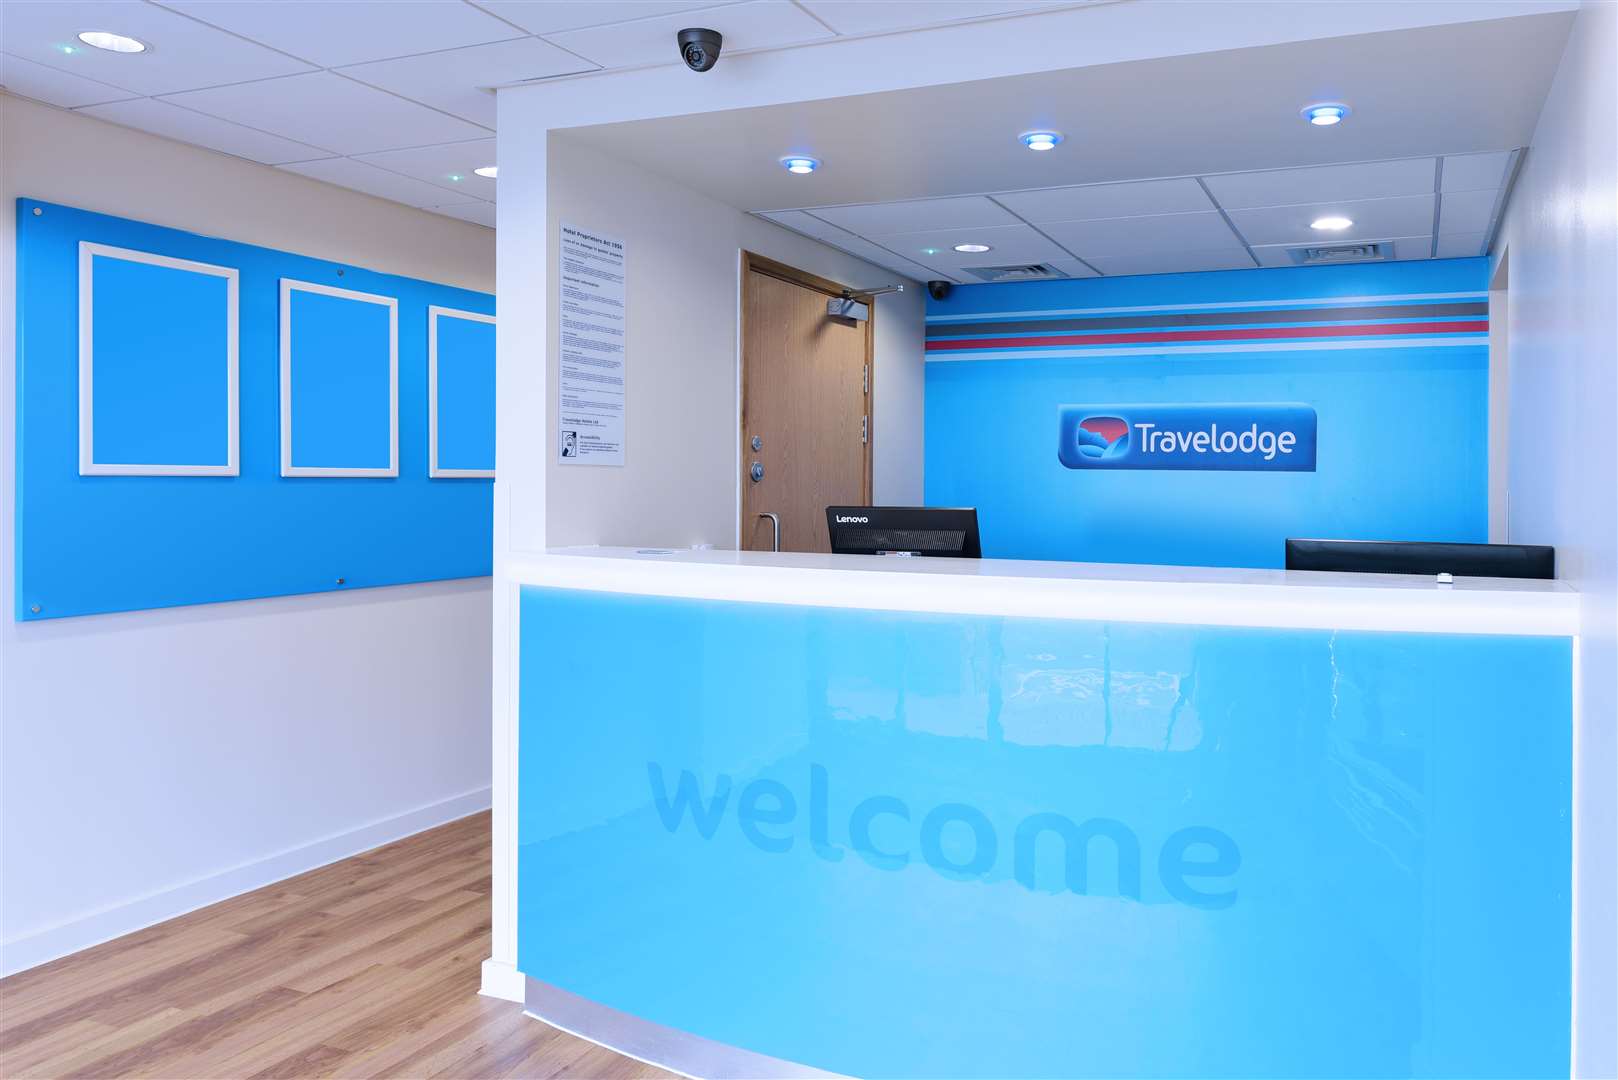 Travelodge has vowed to open a string of new hotels across Kent